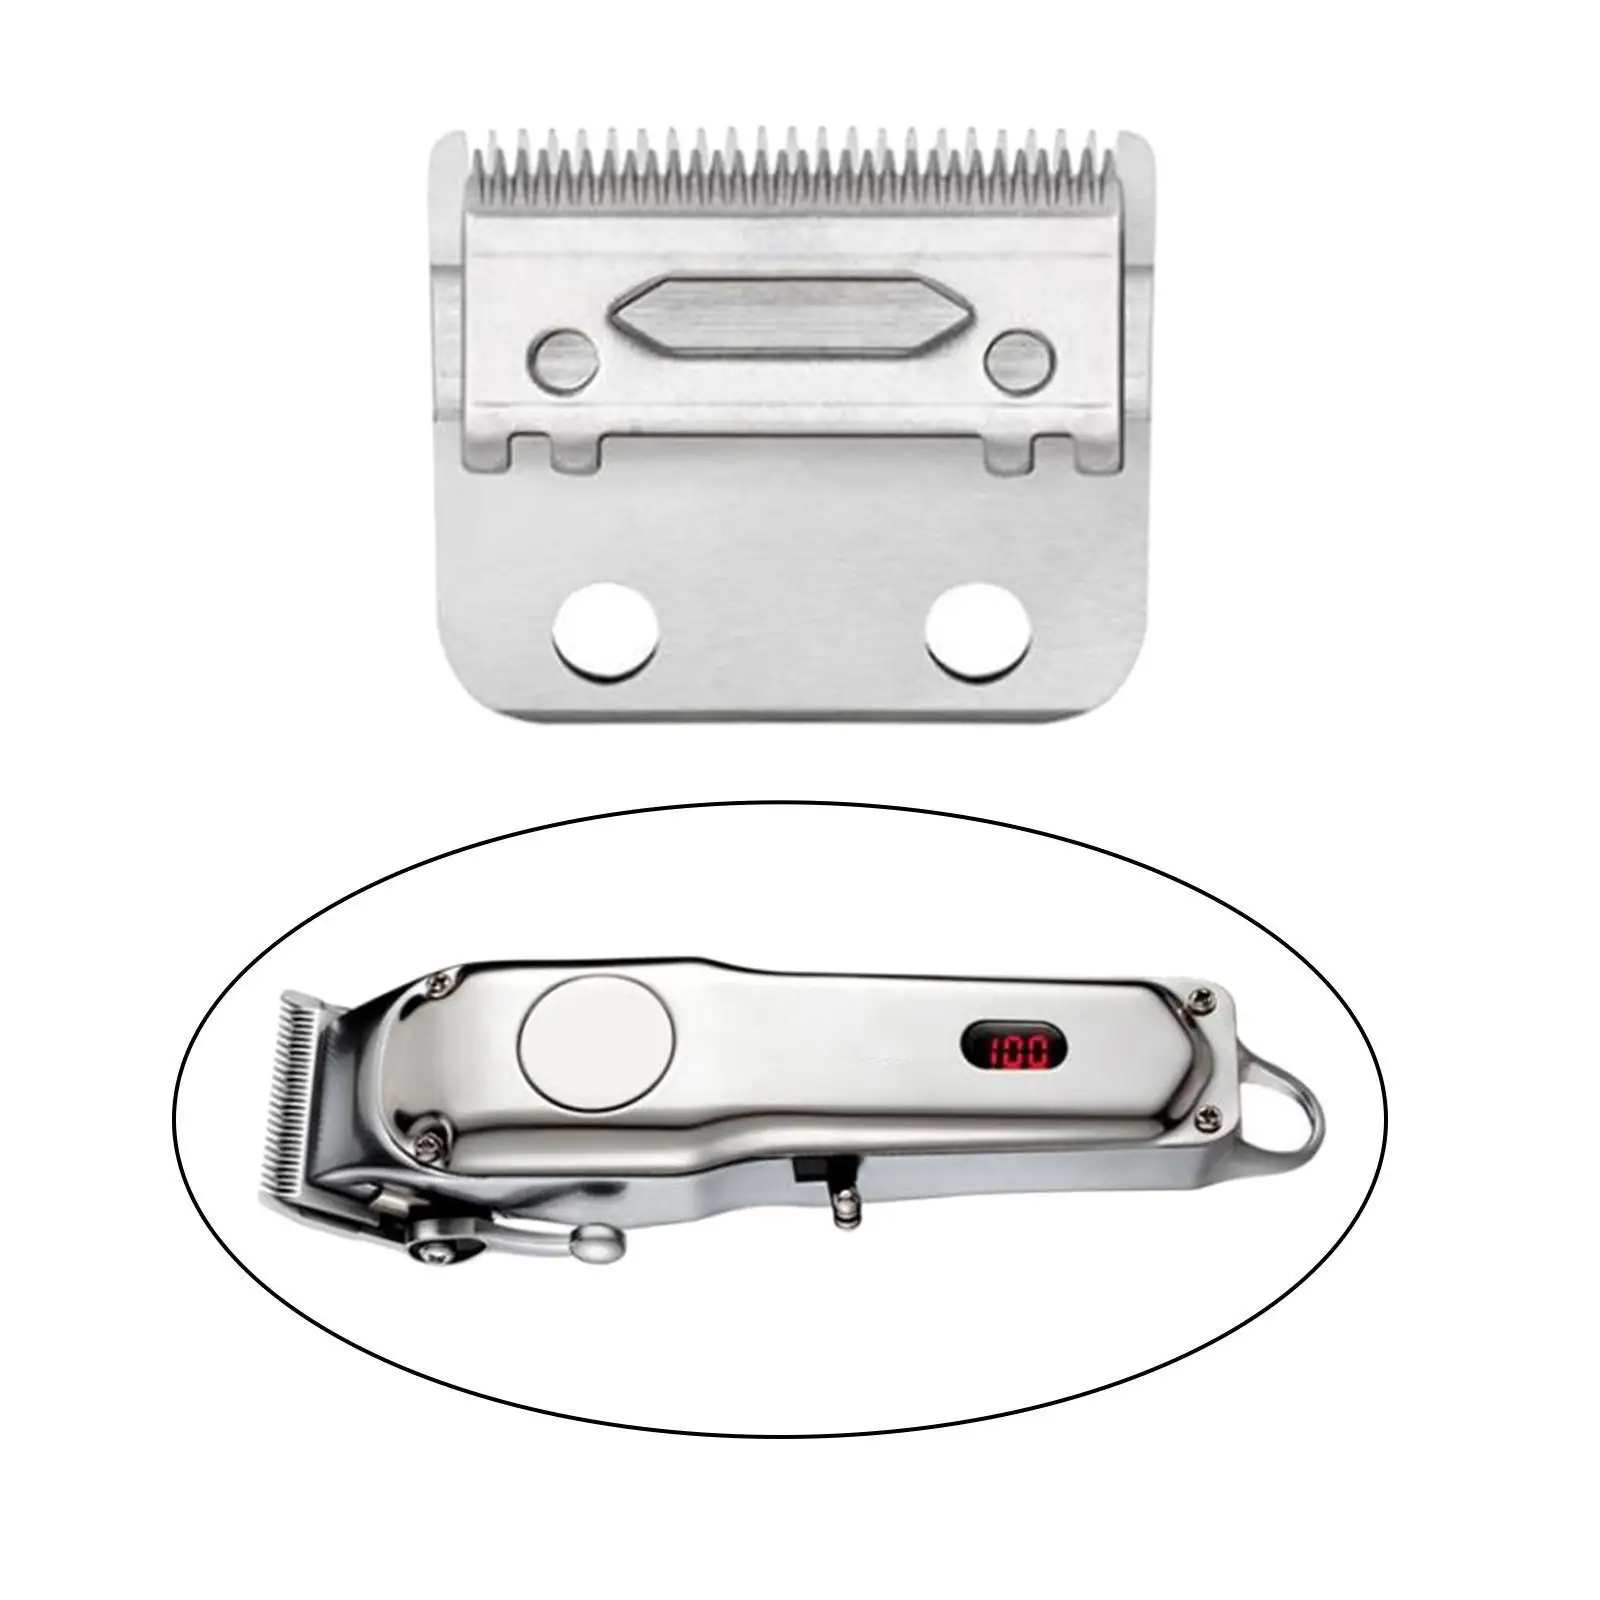 Hair-Hole for Barbers Stylists Cordless Rustproof Accessory